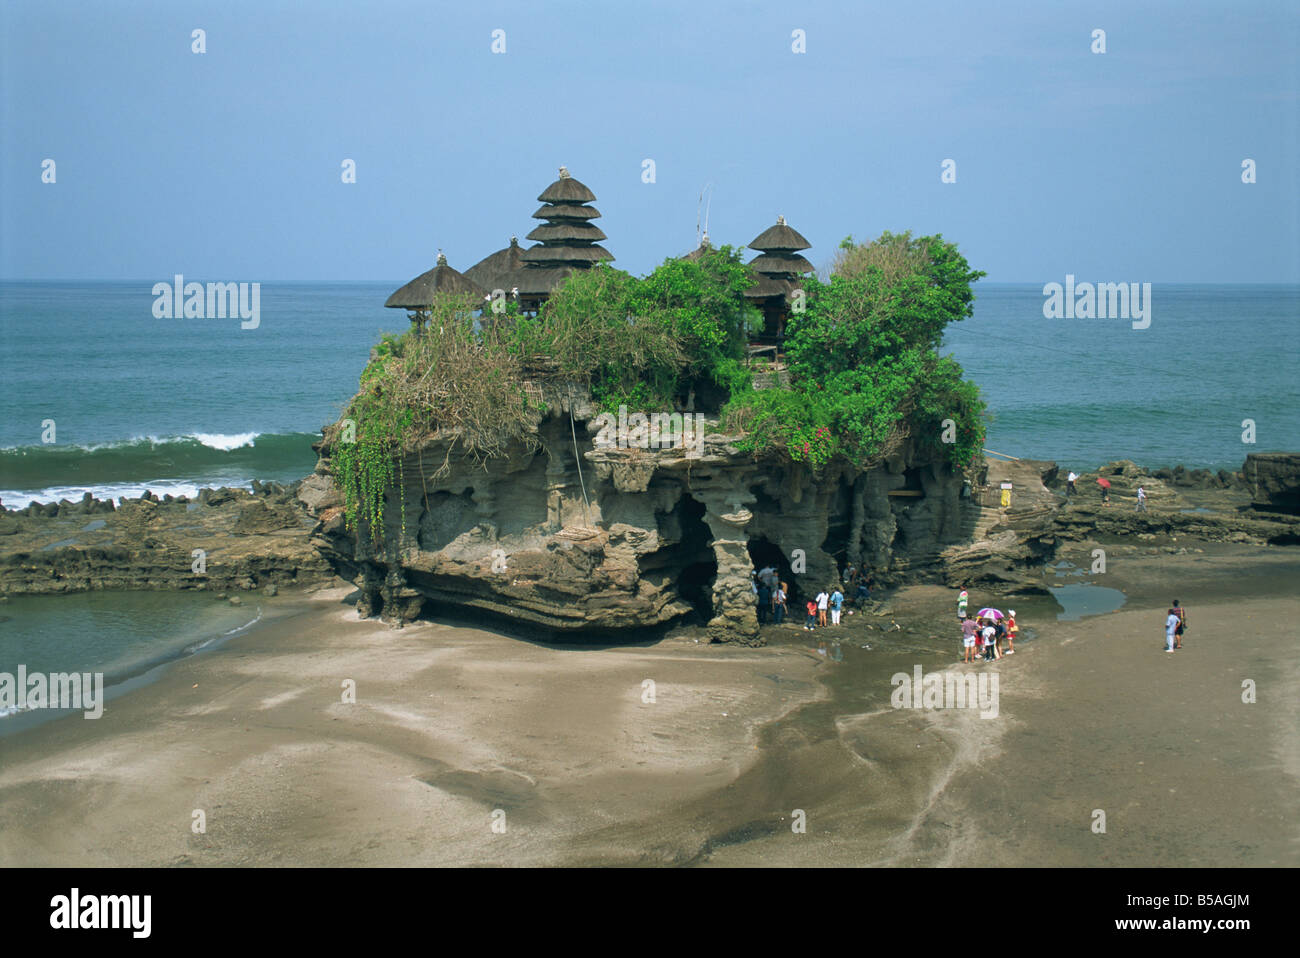 A group of tourists visit the Tanalot Temple on the island of Bali Indonesia Asia G Hellier Stock Photo